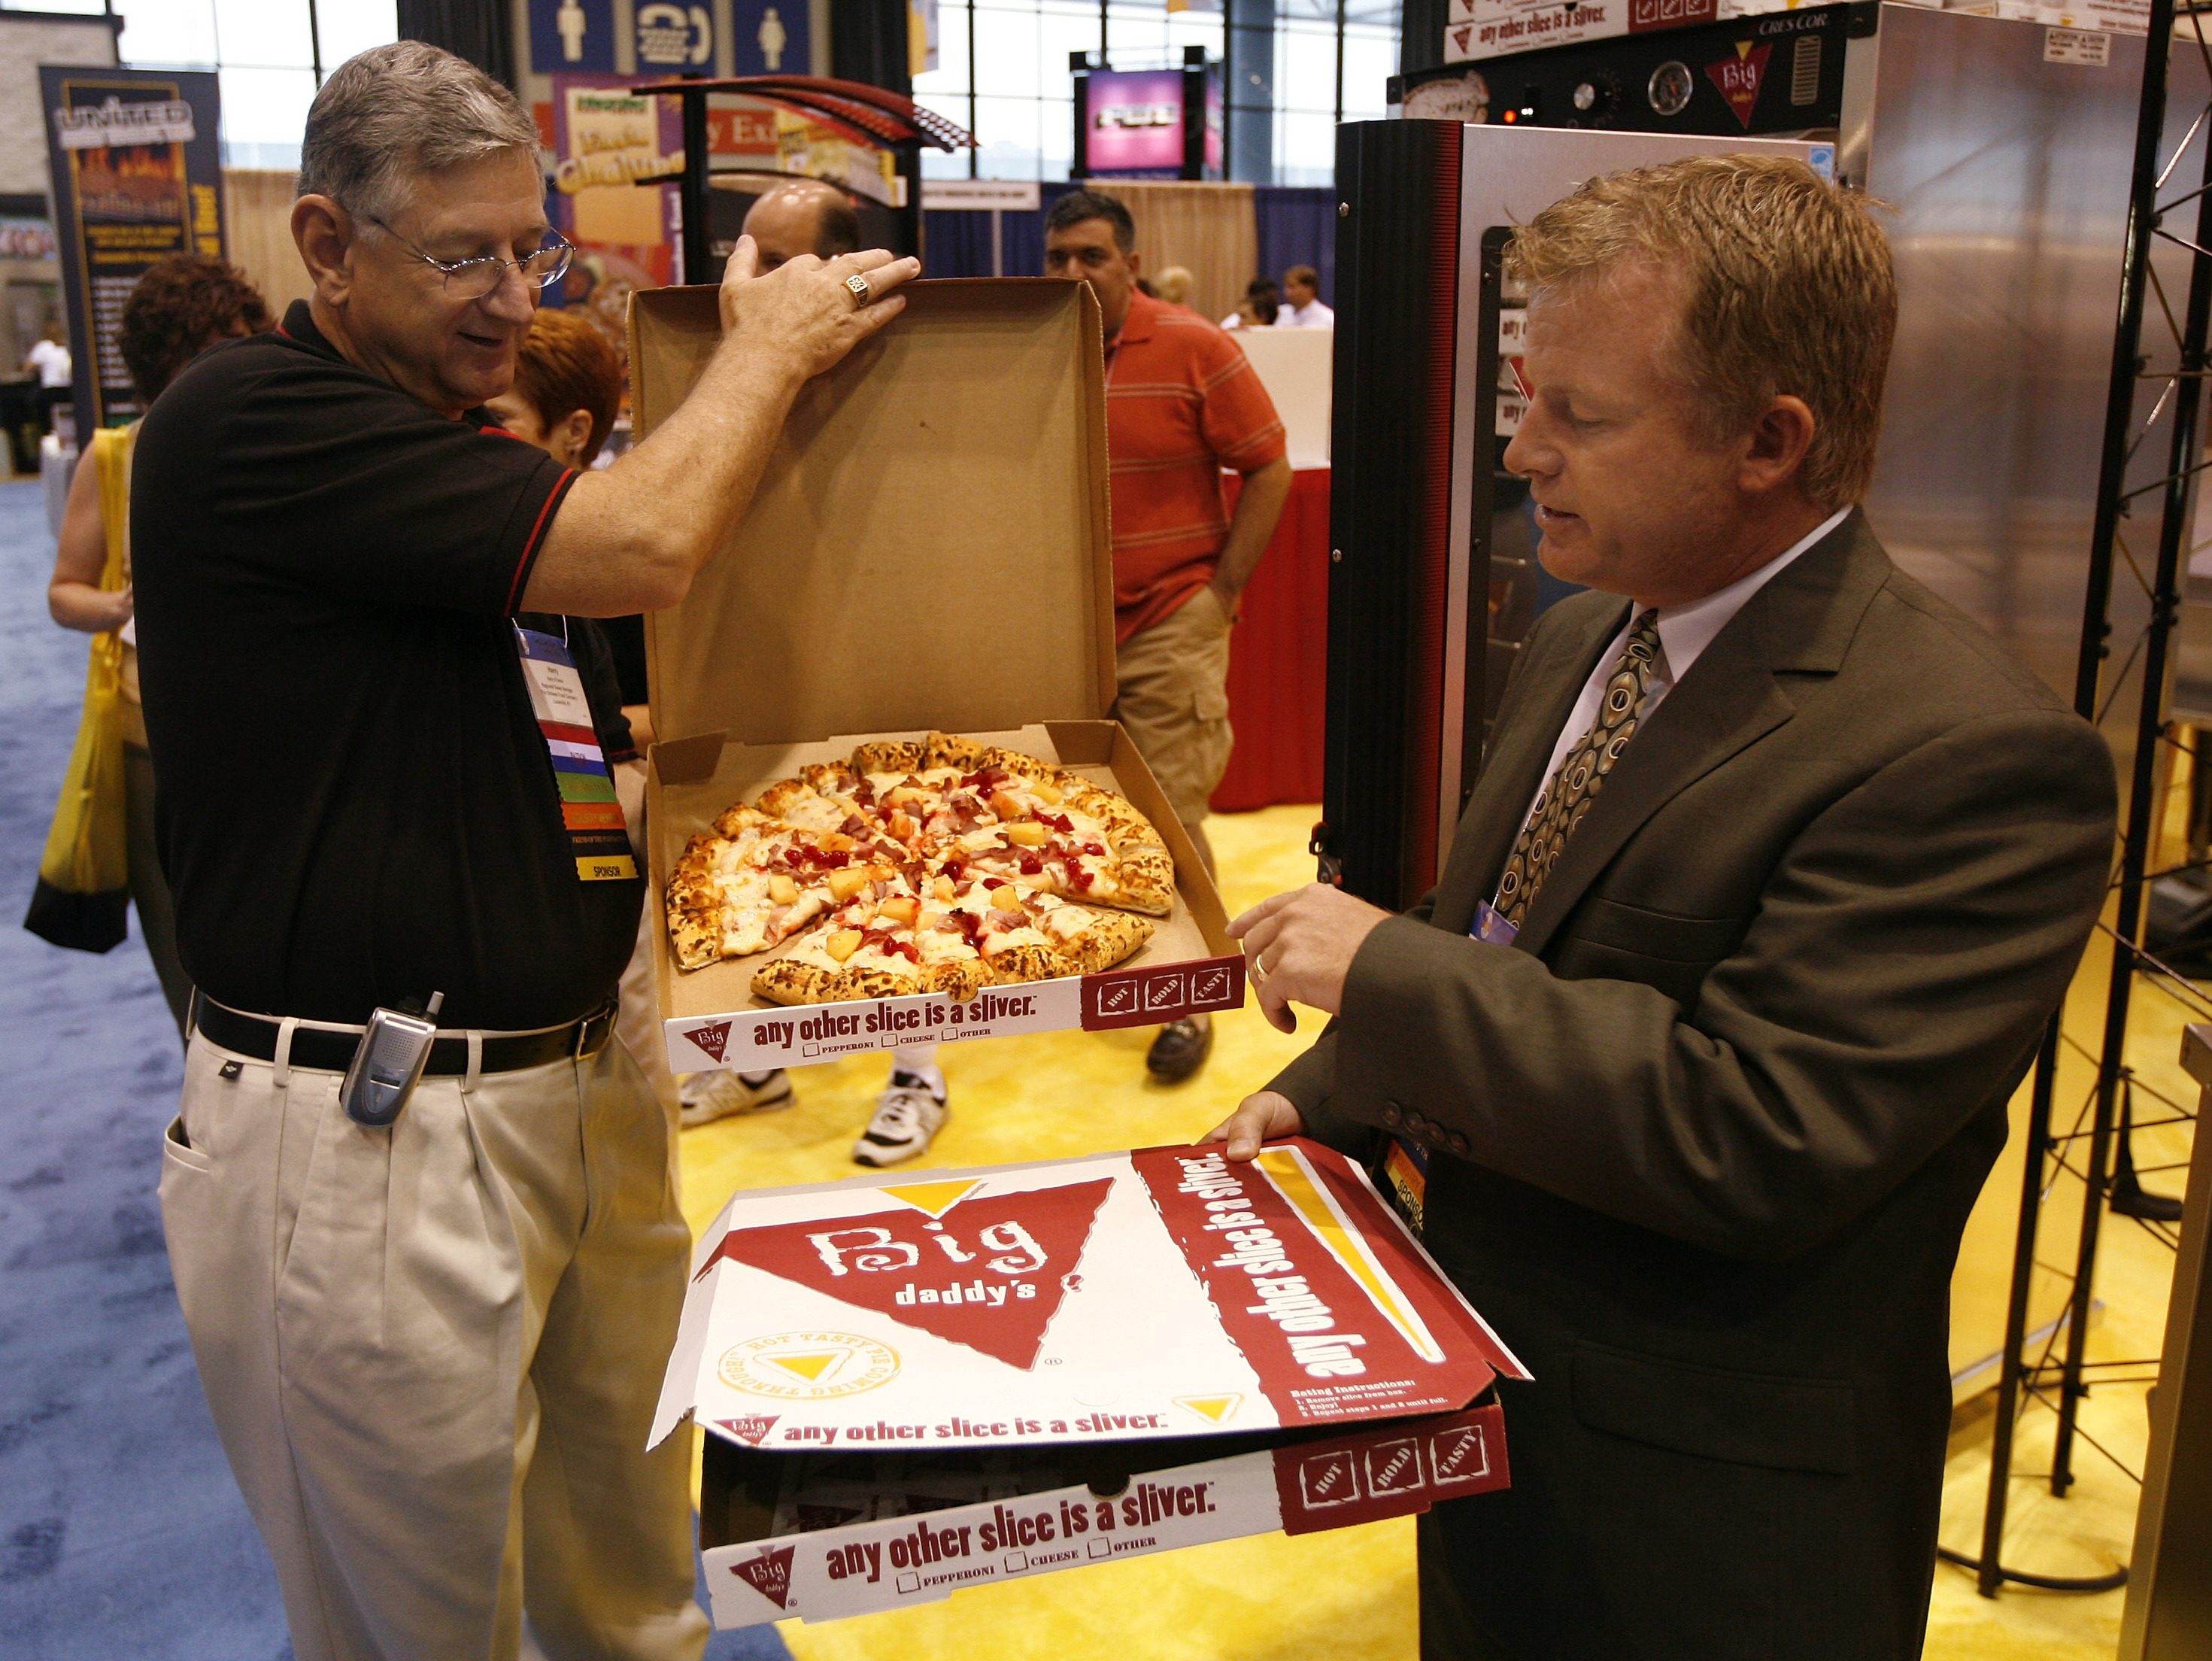 Patrick McCoy (right) and Harry Fowler of the Schwan Food Co. show off their company's Big Daddy's pizza at the School Nutrition Association's national conference in Chicago in 2007. Photo: Brian Kersey/AP